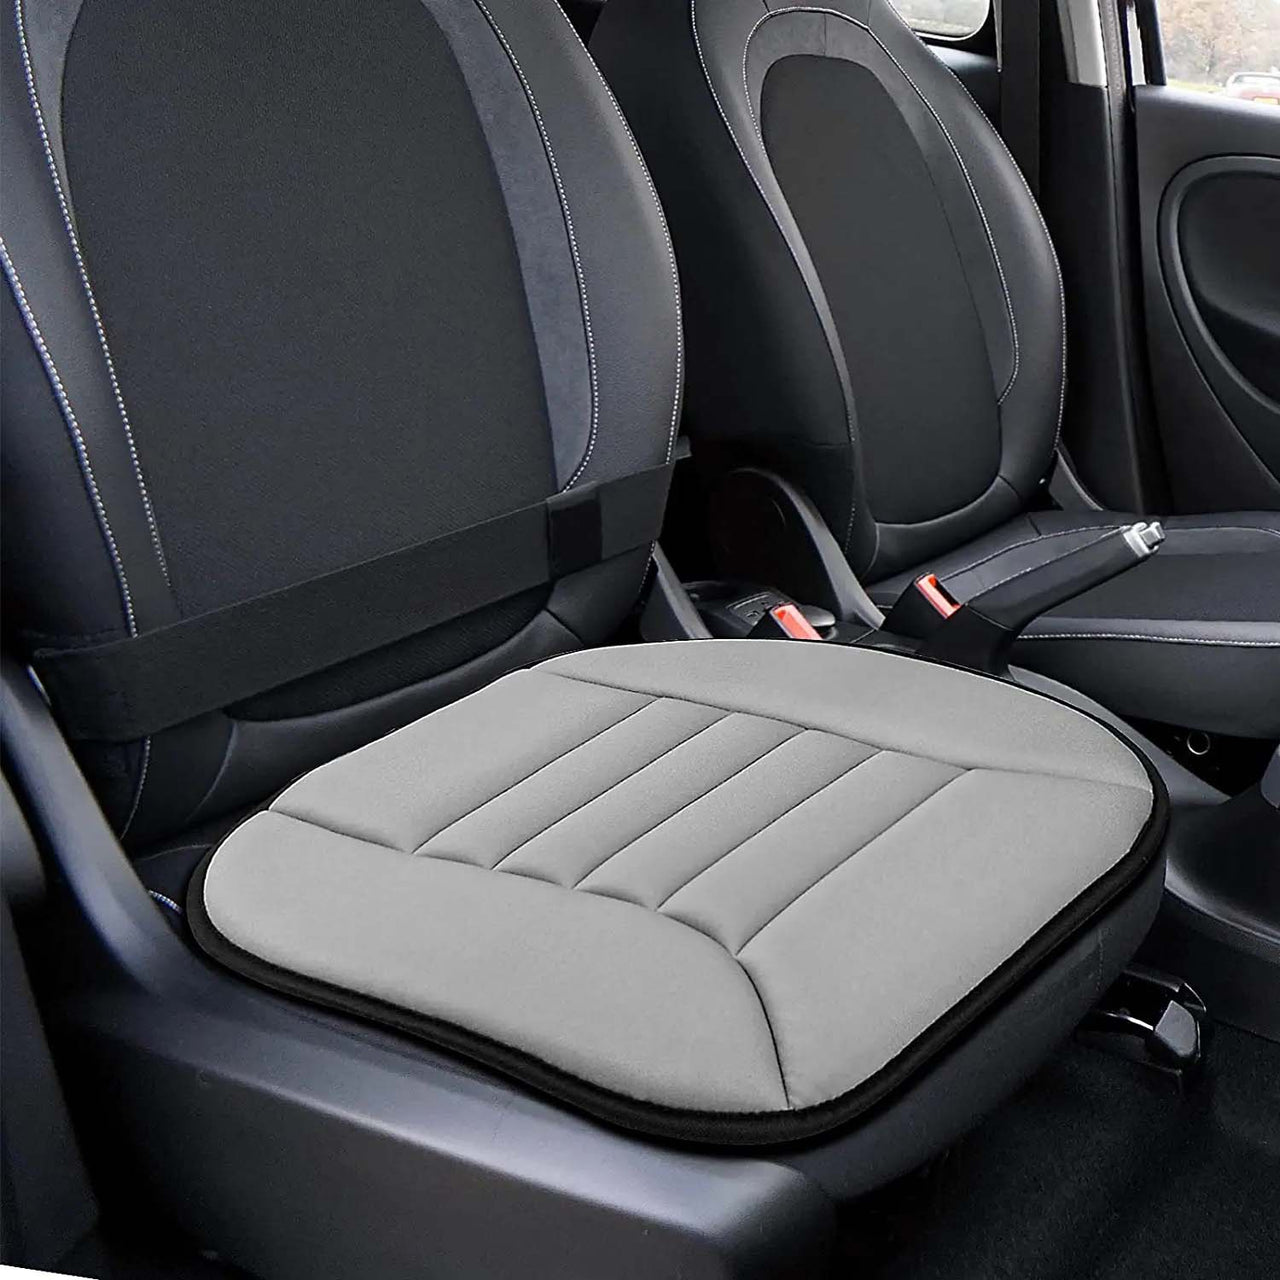 Car Seat Cushion with 1.2inch Comfort Memory Foam, Custom Fit For Your Cars, Seat Cushion for Car and Office Chair HA19989